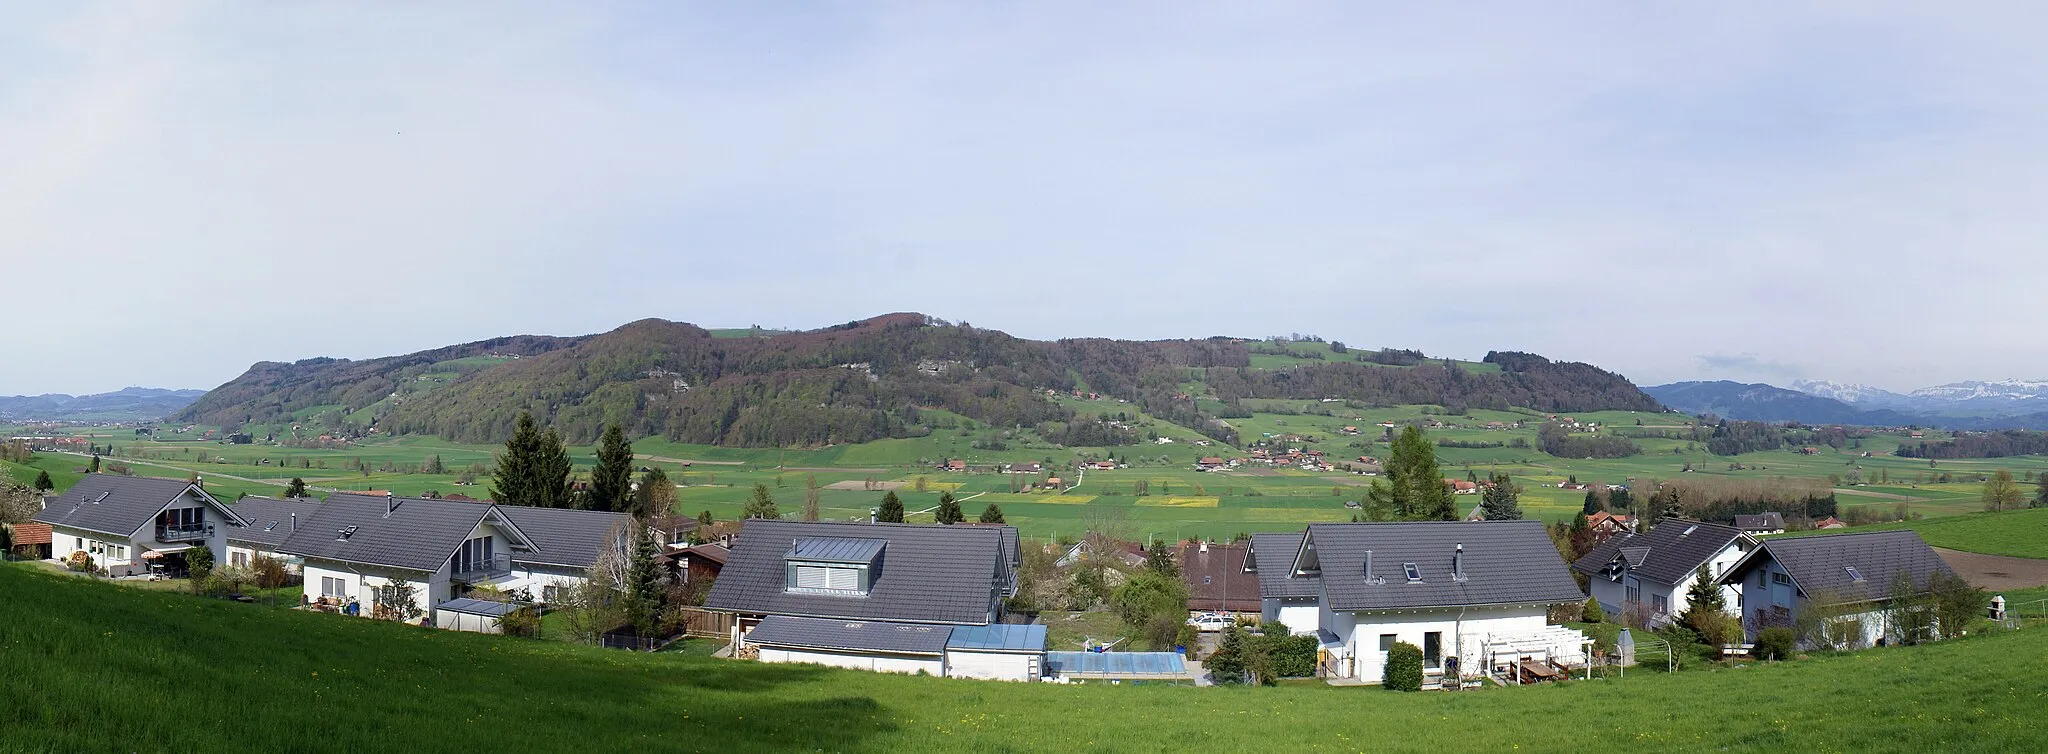 Photo showing: The Belpberg and the northern part of the Gürbe valley, as seen from Rümligen (Switzerland).